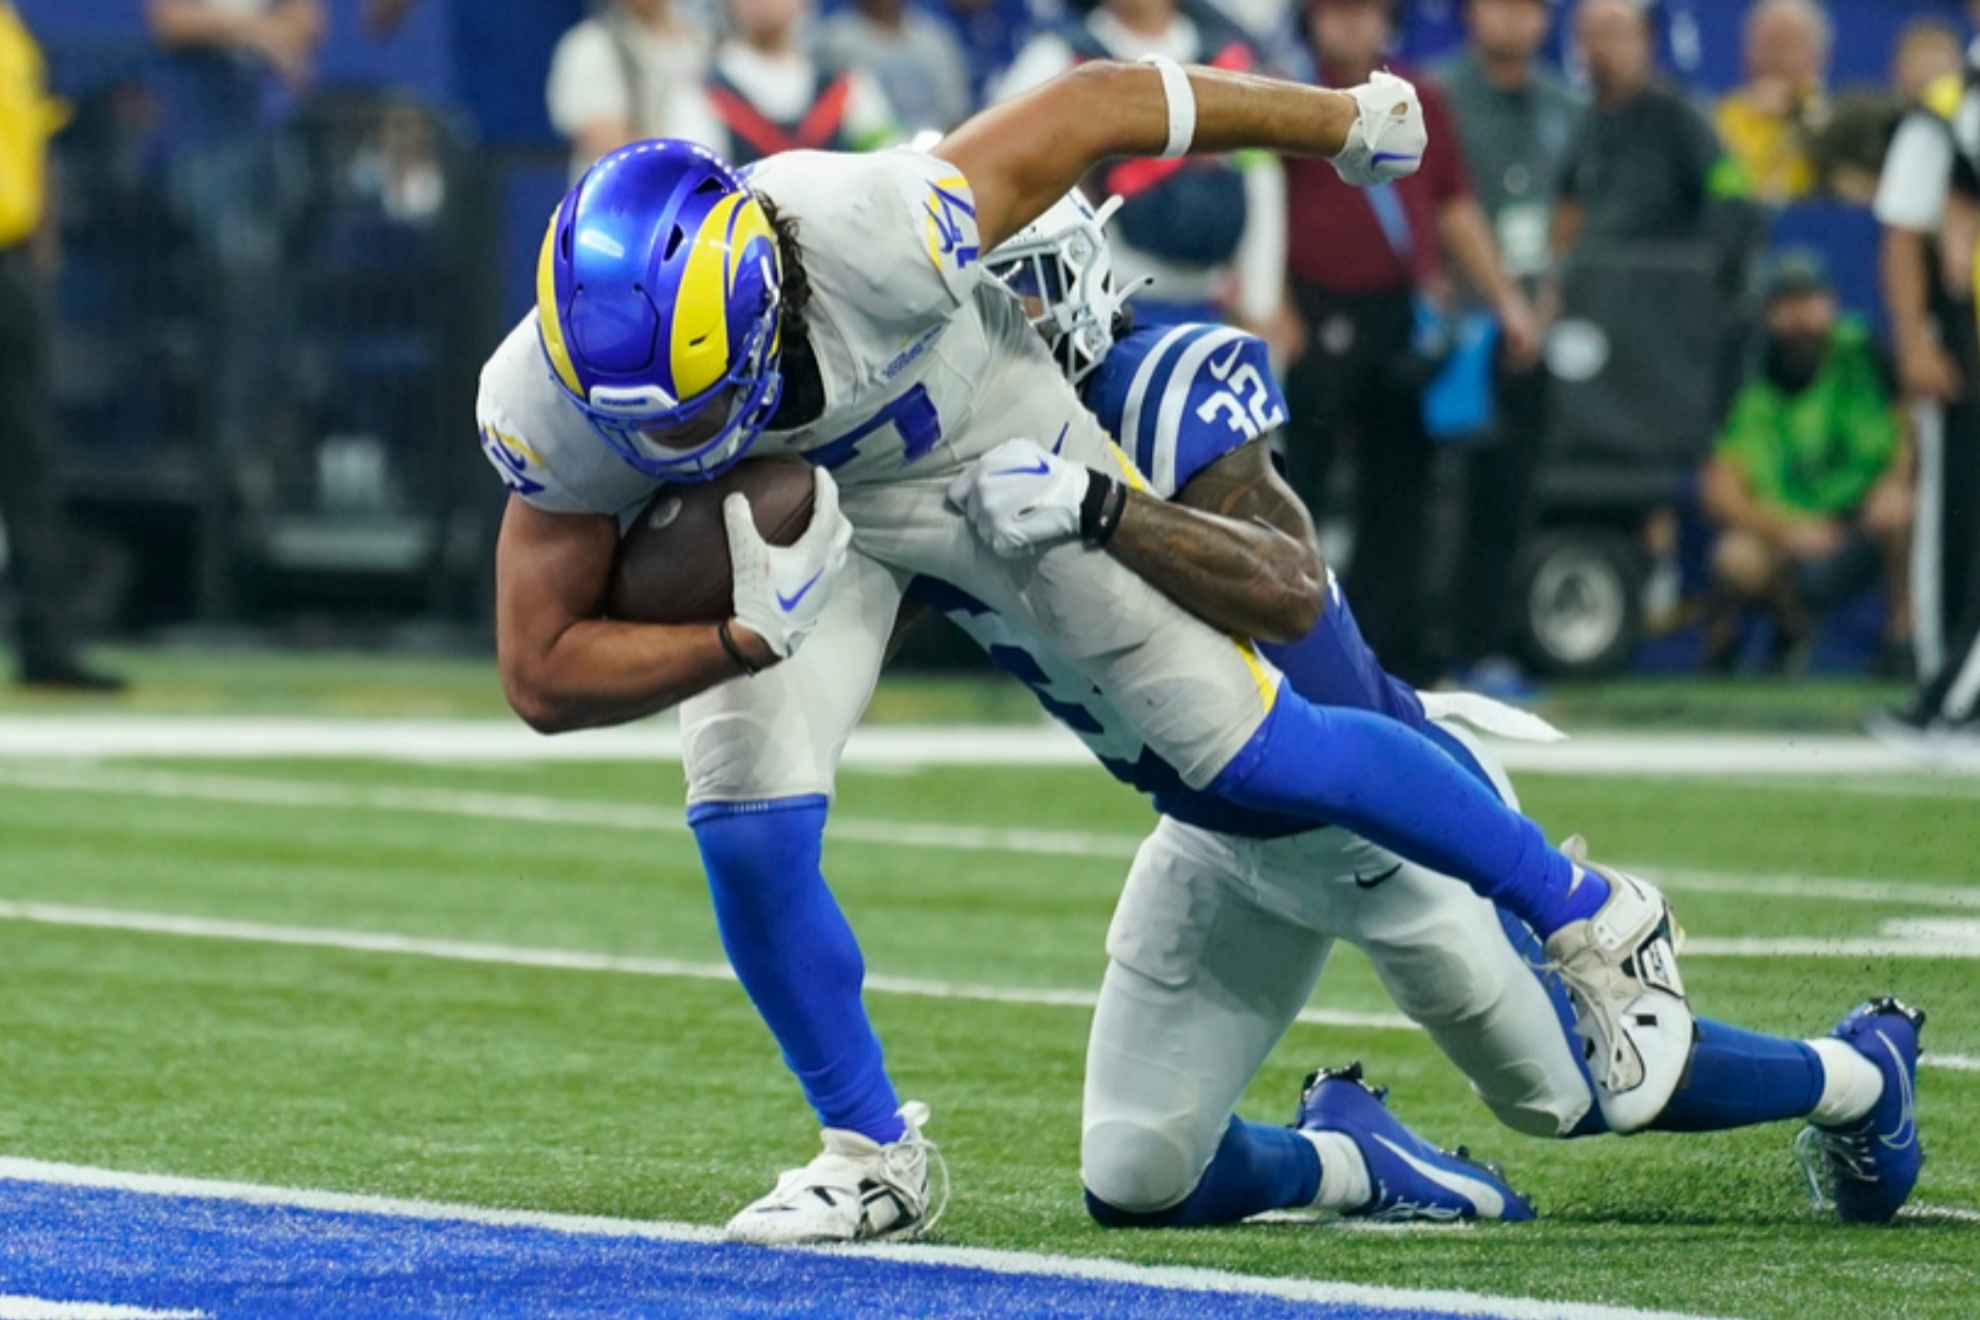 The Rams won in overtime 29-23 against the Colts in Week 4 of the NFLs 2023 season